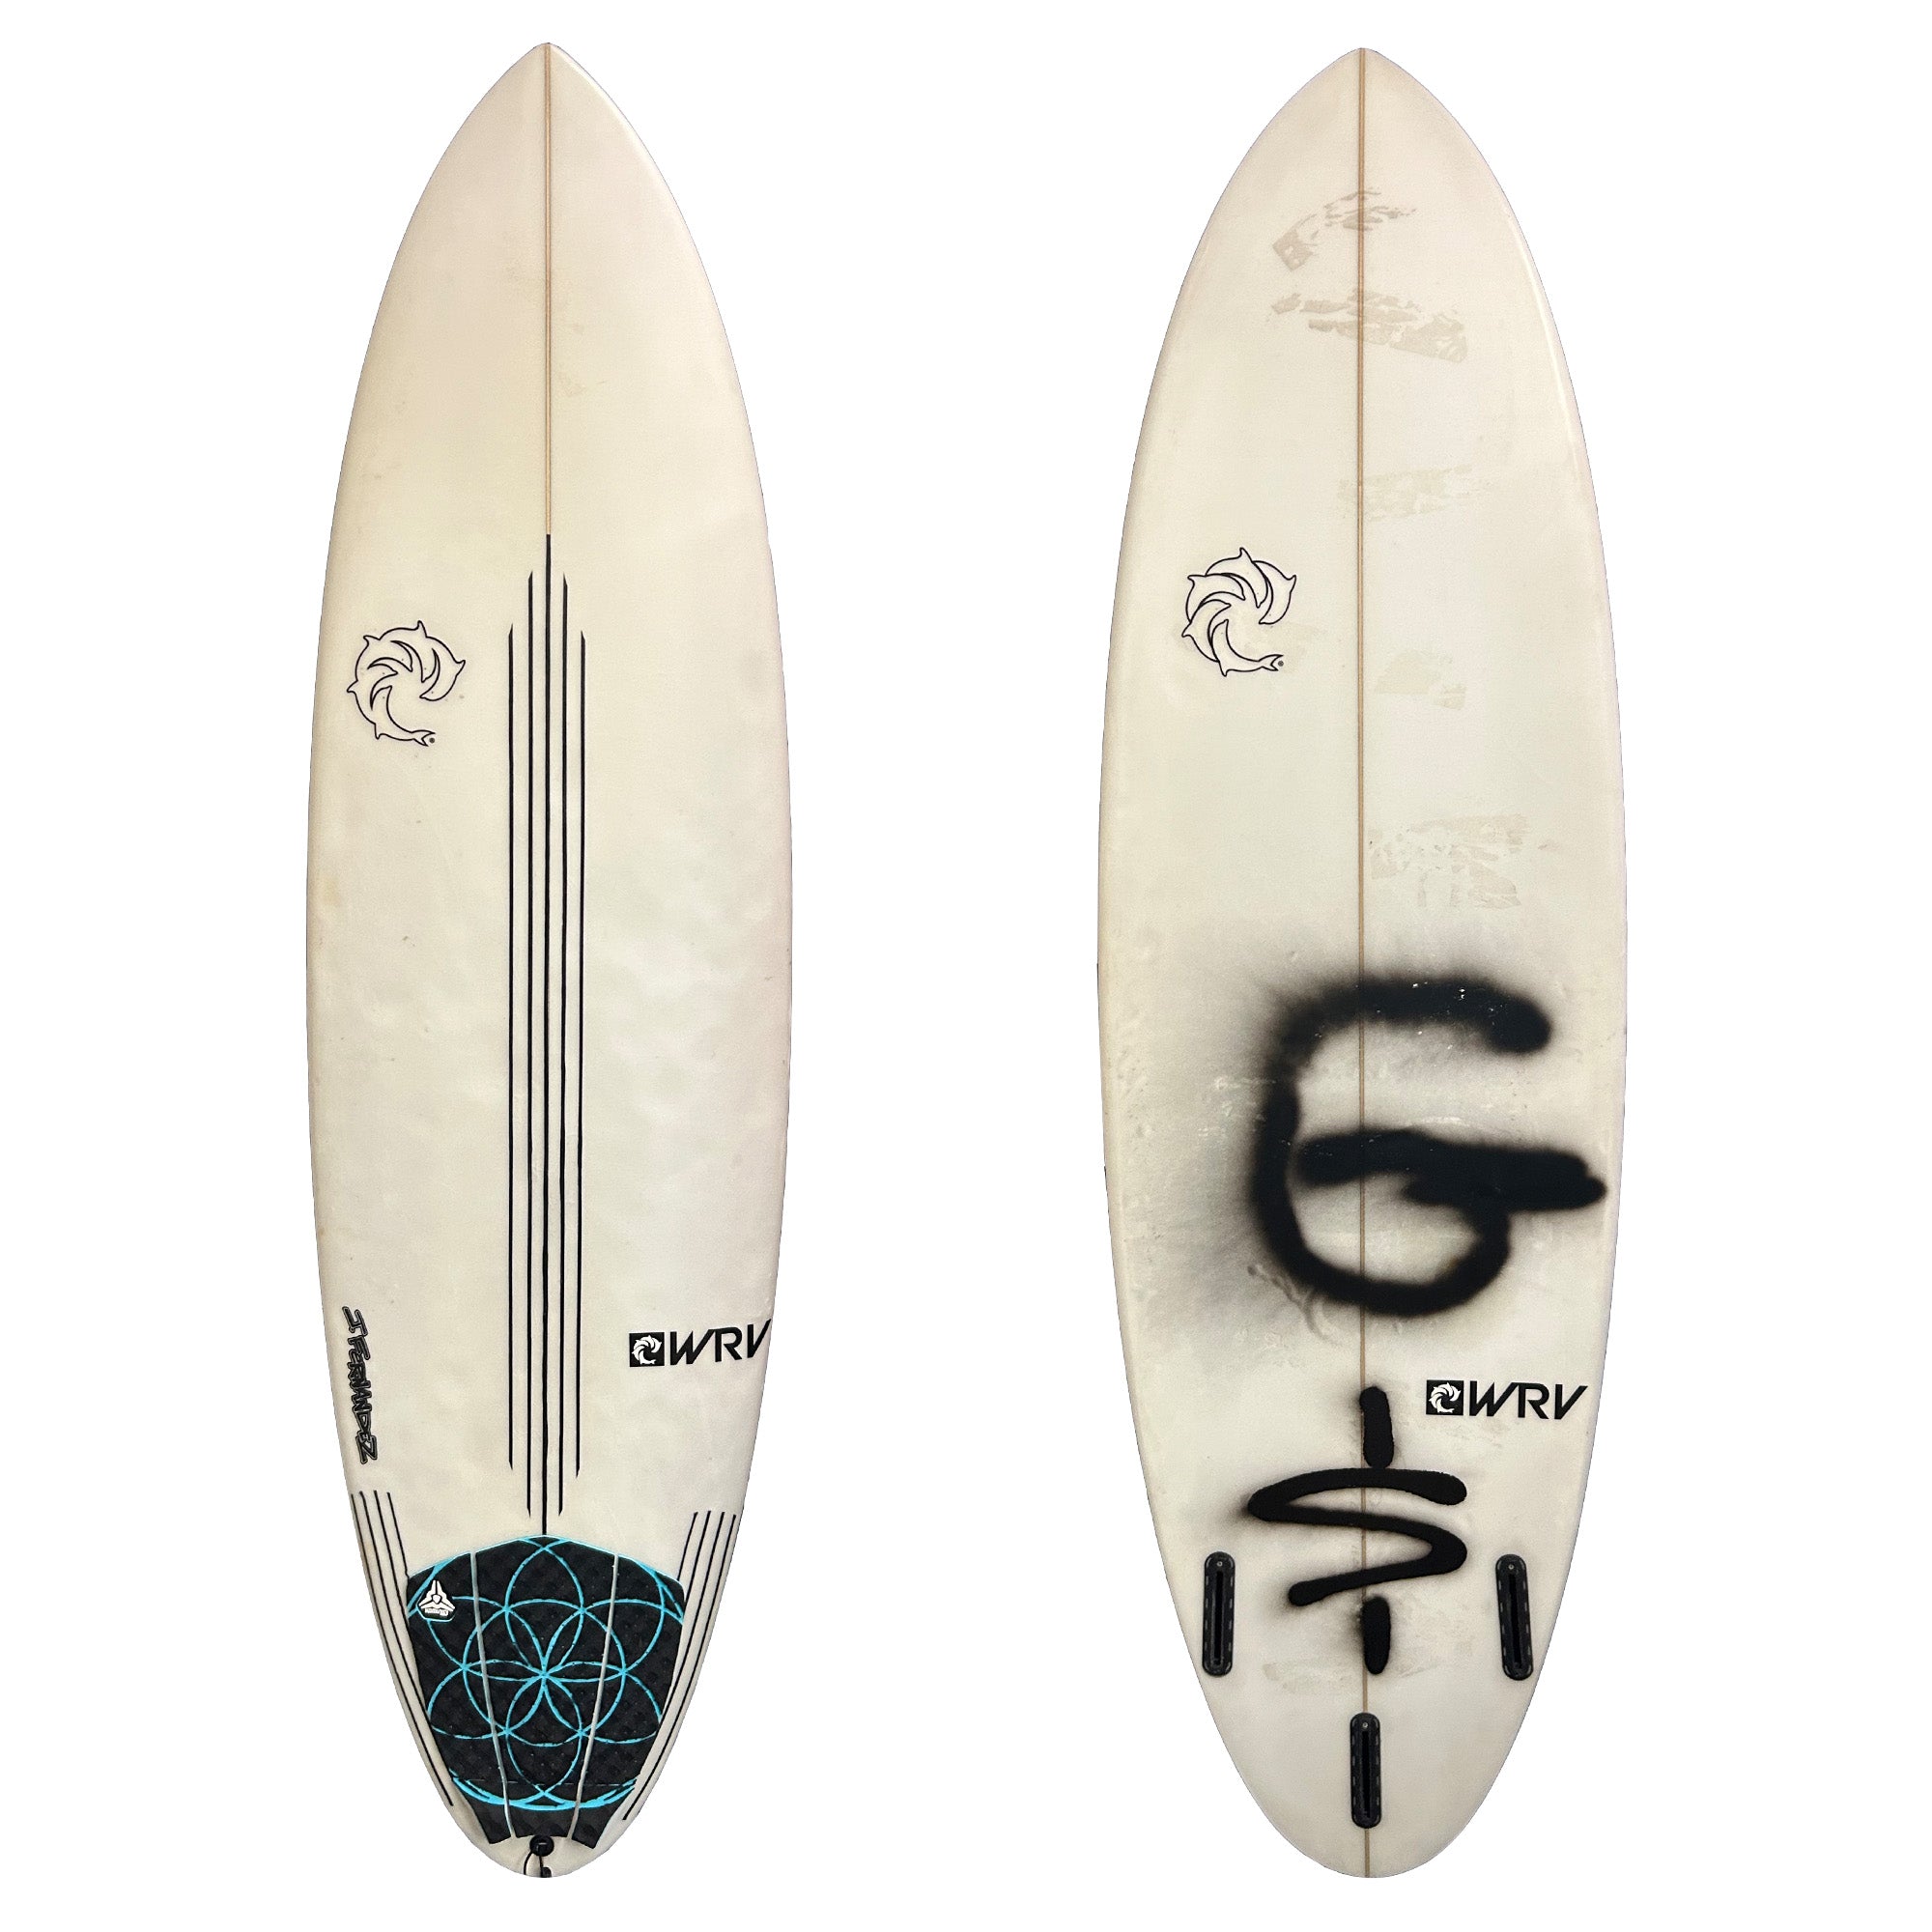 WRV 6'4 Consignment Surfboard